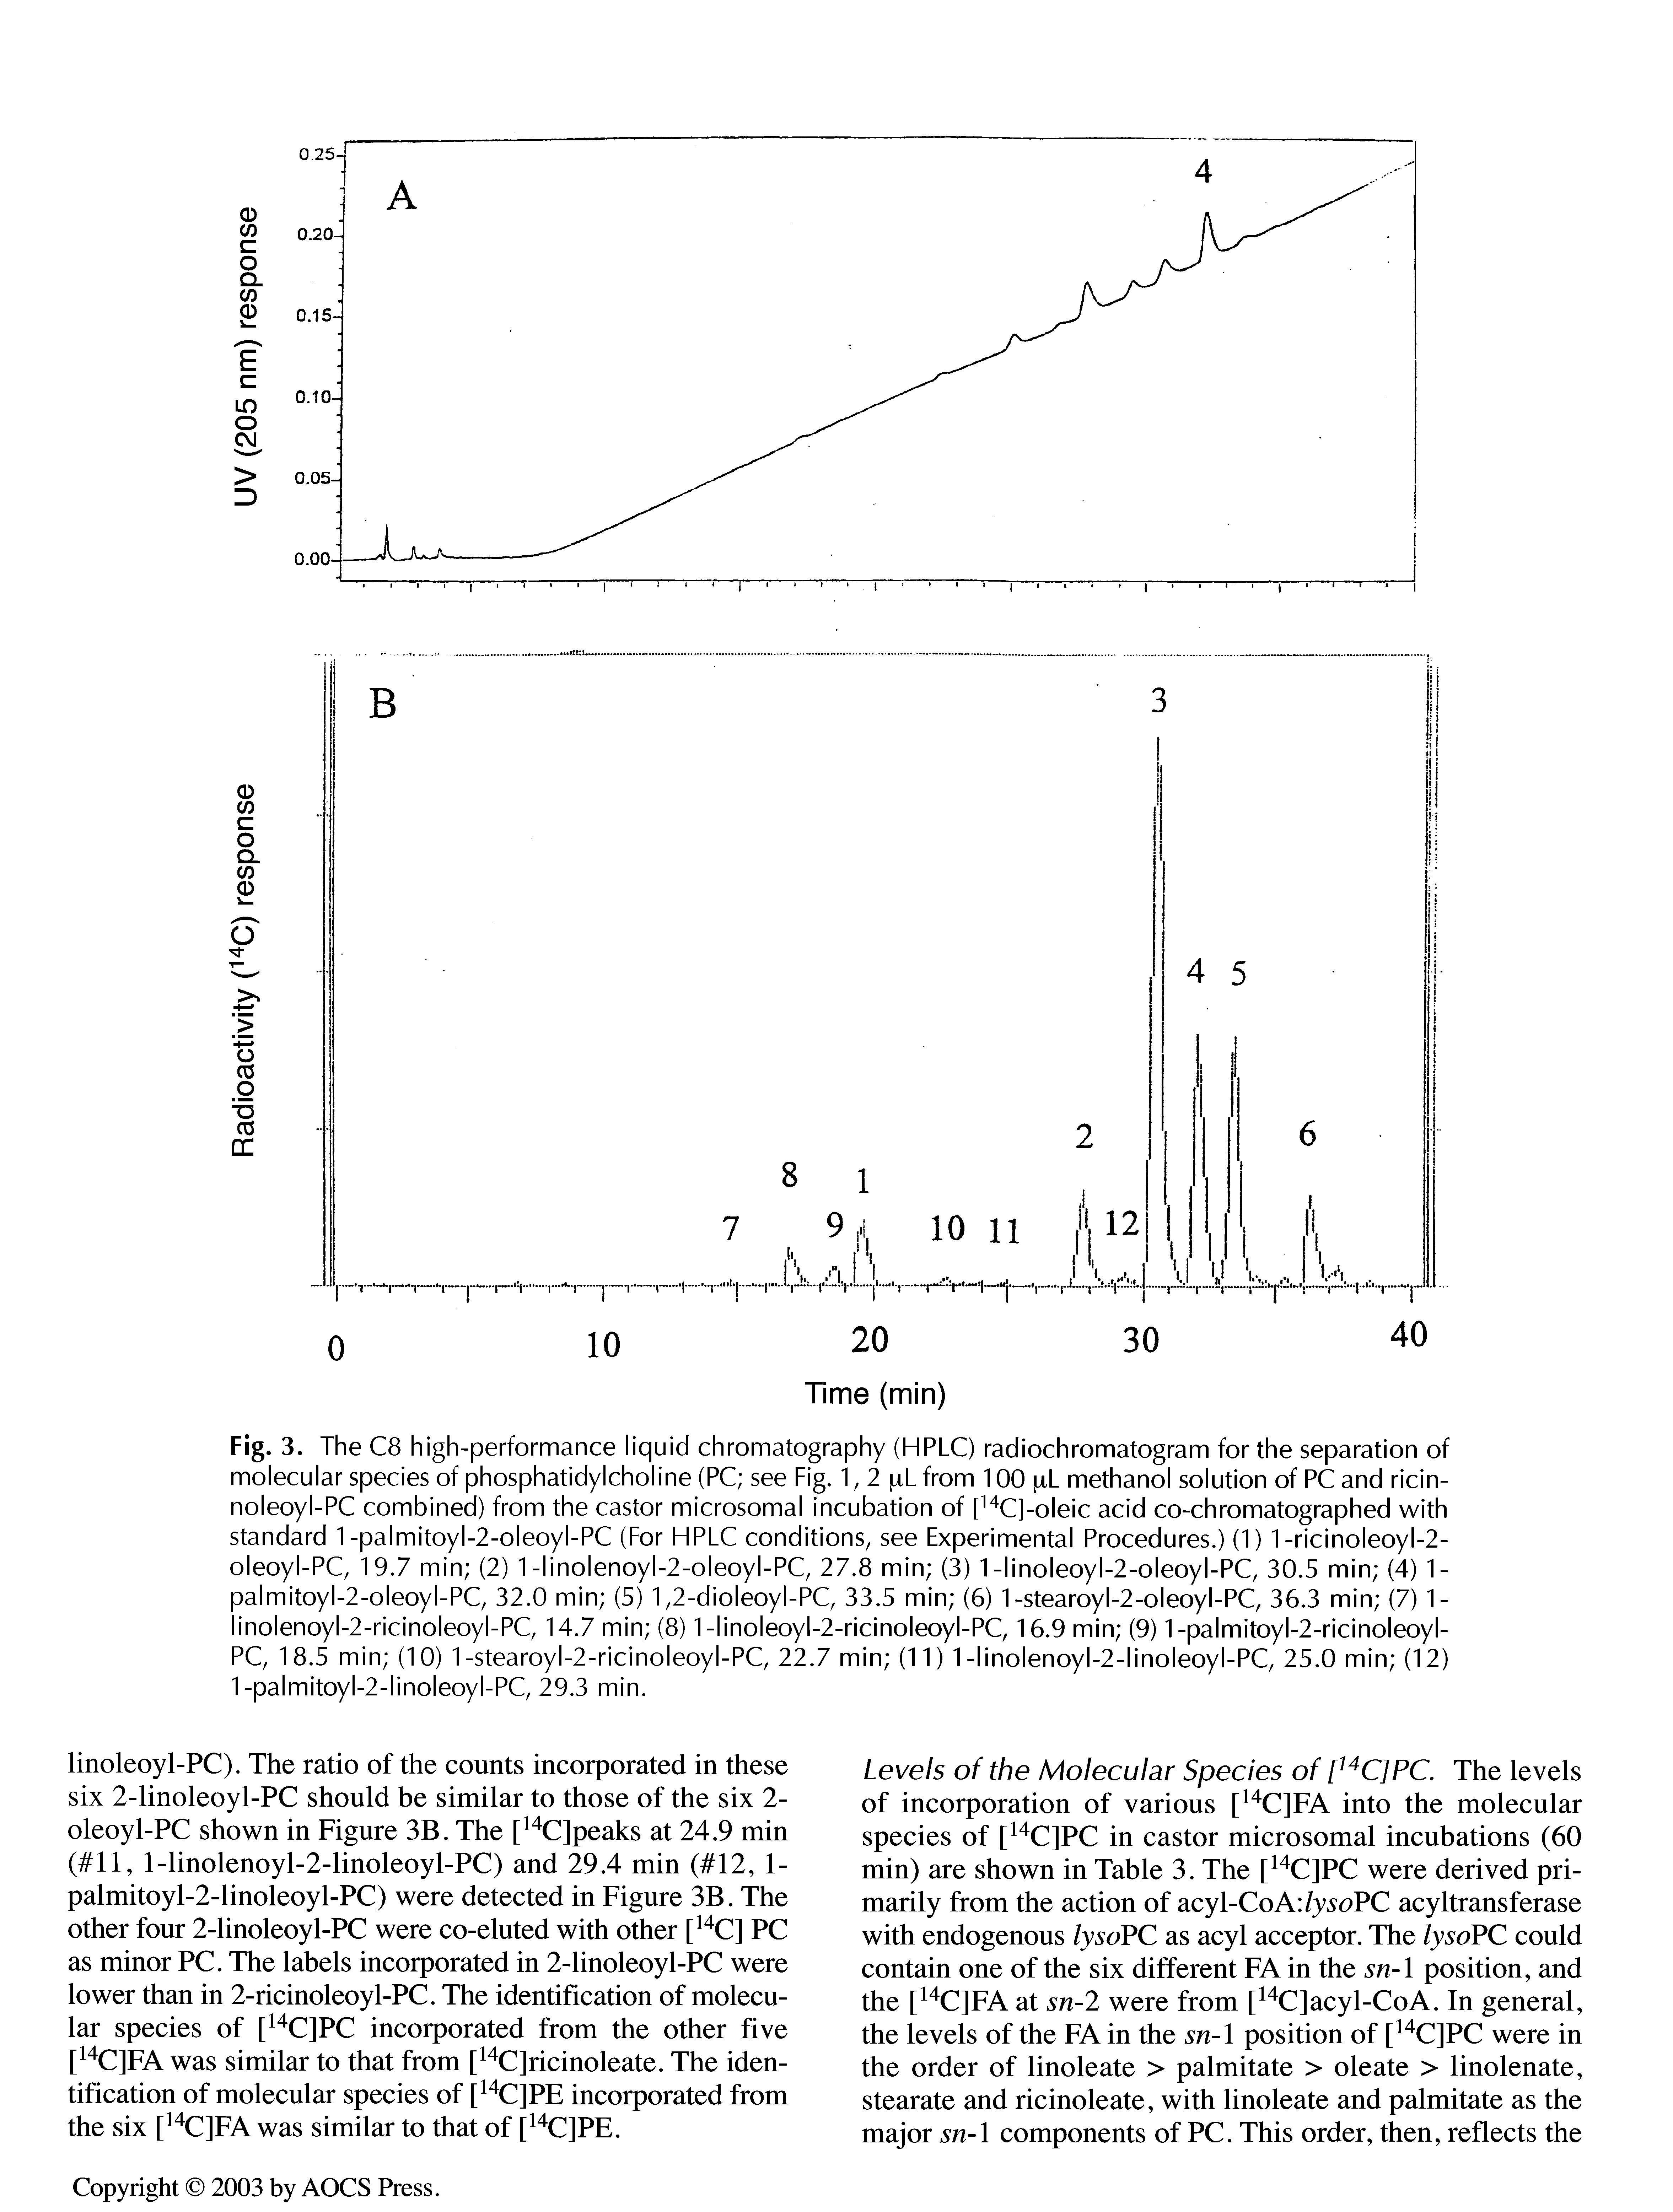 Fig. 3. The C8 high-performance liquid chromatography (HPLC) radiochromatogram for the separation of molecular species of phosphatidylcholine (PC see Fig. 1,2 pL from 100 il methanol solution of PC and ricin-noleoyl-PC combined) from the castor microsomal incubation of [ " C]-oleic acid co-chromatographed with standard 1-palmitoyl-2-oleoyl-PC (For HPLC conditions, see Experimental Procedures.) (1) 1-ricinoleoyl-2-oleoyl-PC, 19.7 min (2) 1-linolenoyl-2-oleoyl-PC, 27.8 min (3) 1-linoleoyl-2-oleoyl-PC, 30.5 min (4) 1-palmitoyl-2-oleoyl-PC, 32.0 min (5) 1,2-dioleoyl-PC, 33.5 min (6) 1-stearoyl-2-oleoyl-PC, 36.3 min (7) 1-linolenoyl-2-ricinoleoyl-PC, 14.7 min (8) 1-linoleoyl-2-ricinoleoyl-PC, 16.9 min (9) 1-palmitoyl-2-ricinoleoyl-PC, 18.5 min (10) 1-stearoyl-2-ricinoleoyl-PC, 22.7 min (11) 1-linolenoyl-2-linoleoyl-PC, 25.0 min (12) 1-palmitoyl-2-linoleoyl-PC, 29.3 min.